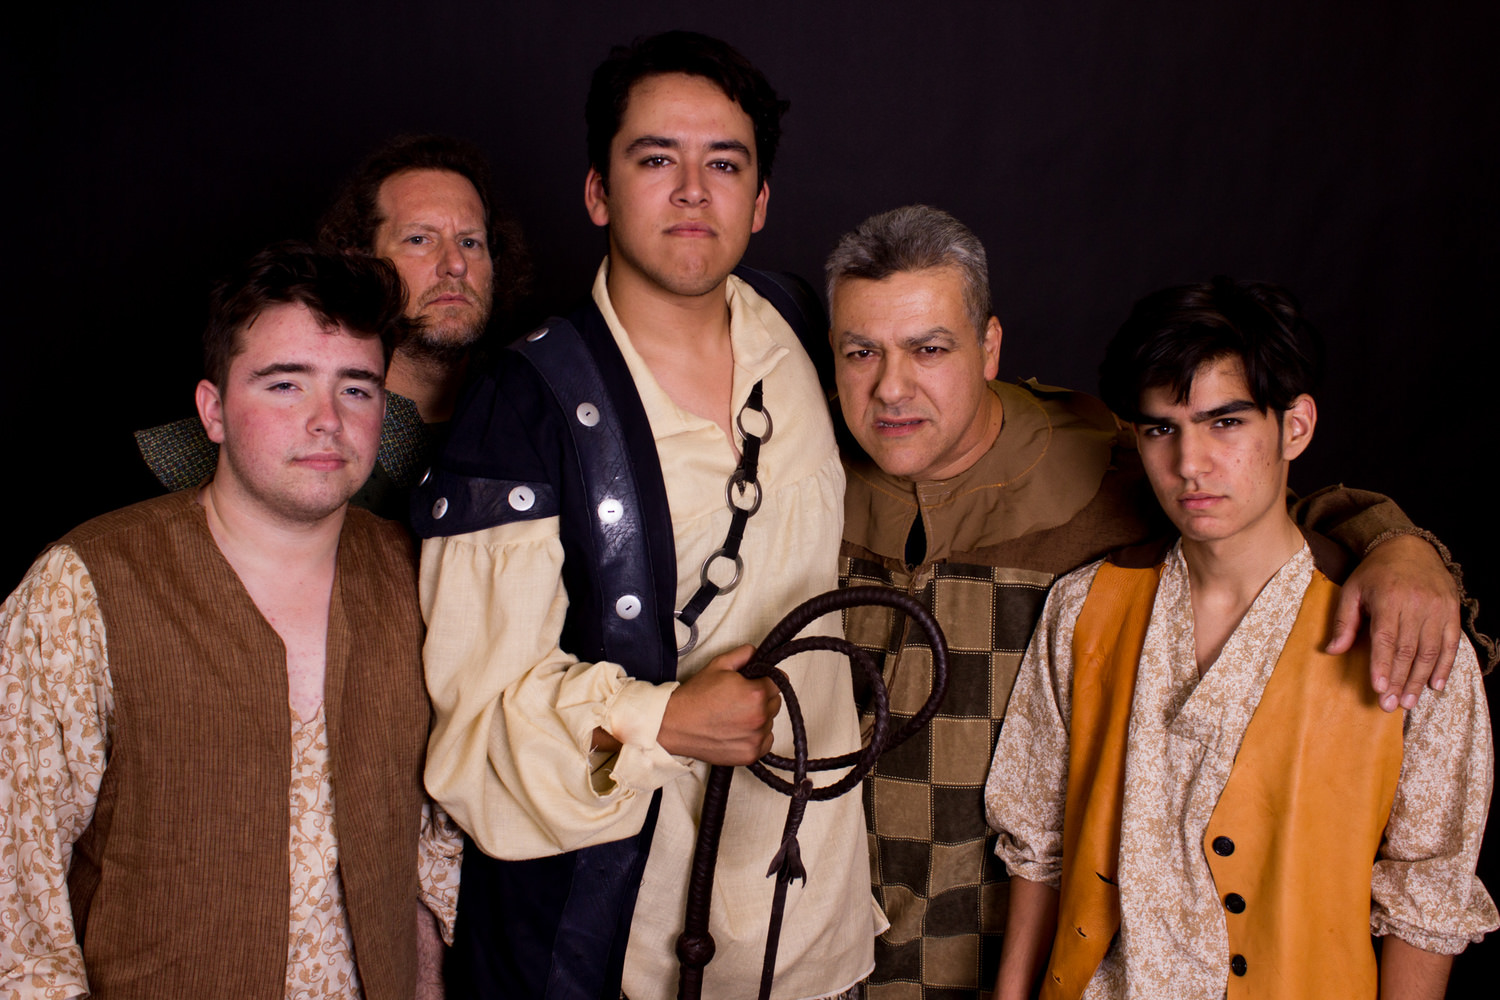 From left to right: Justice Krugman (Barber; Muleteer), Kevin Coren (Muleteer), Emilio Lopez (Pedro; Captain of the Inquisition), Jesse Rodriguez (Padre; Muleteer; Guitar Player) and Josh Velazquez (Anselmo; Muleteer) in the Ghostlight Theatre Ensemble production of 